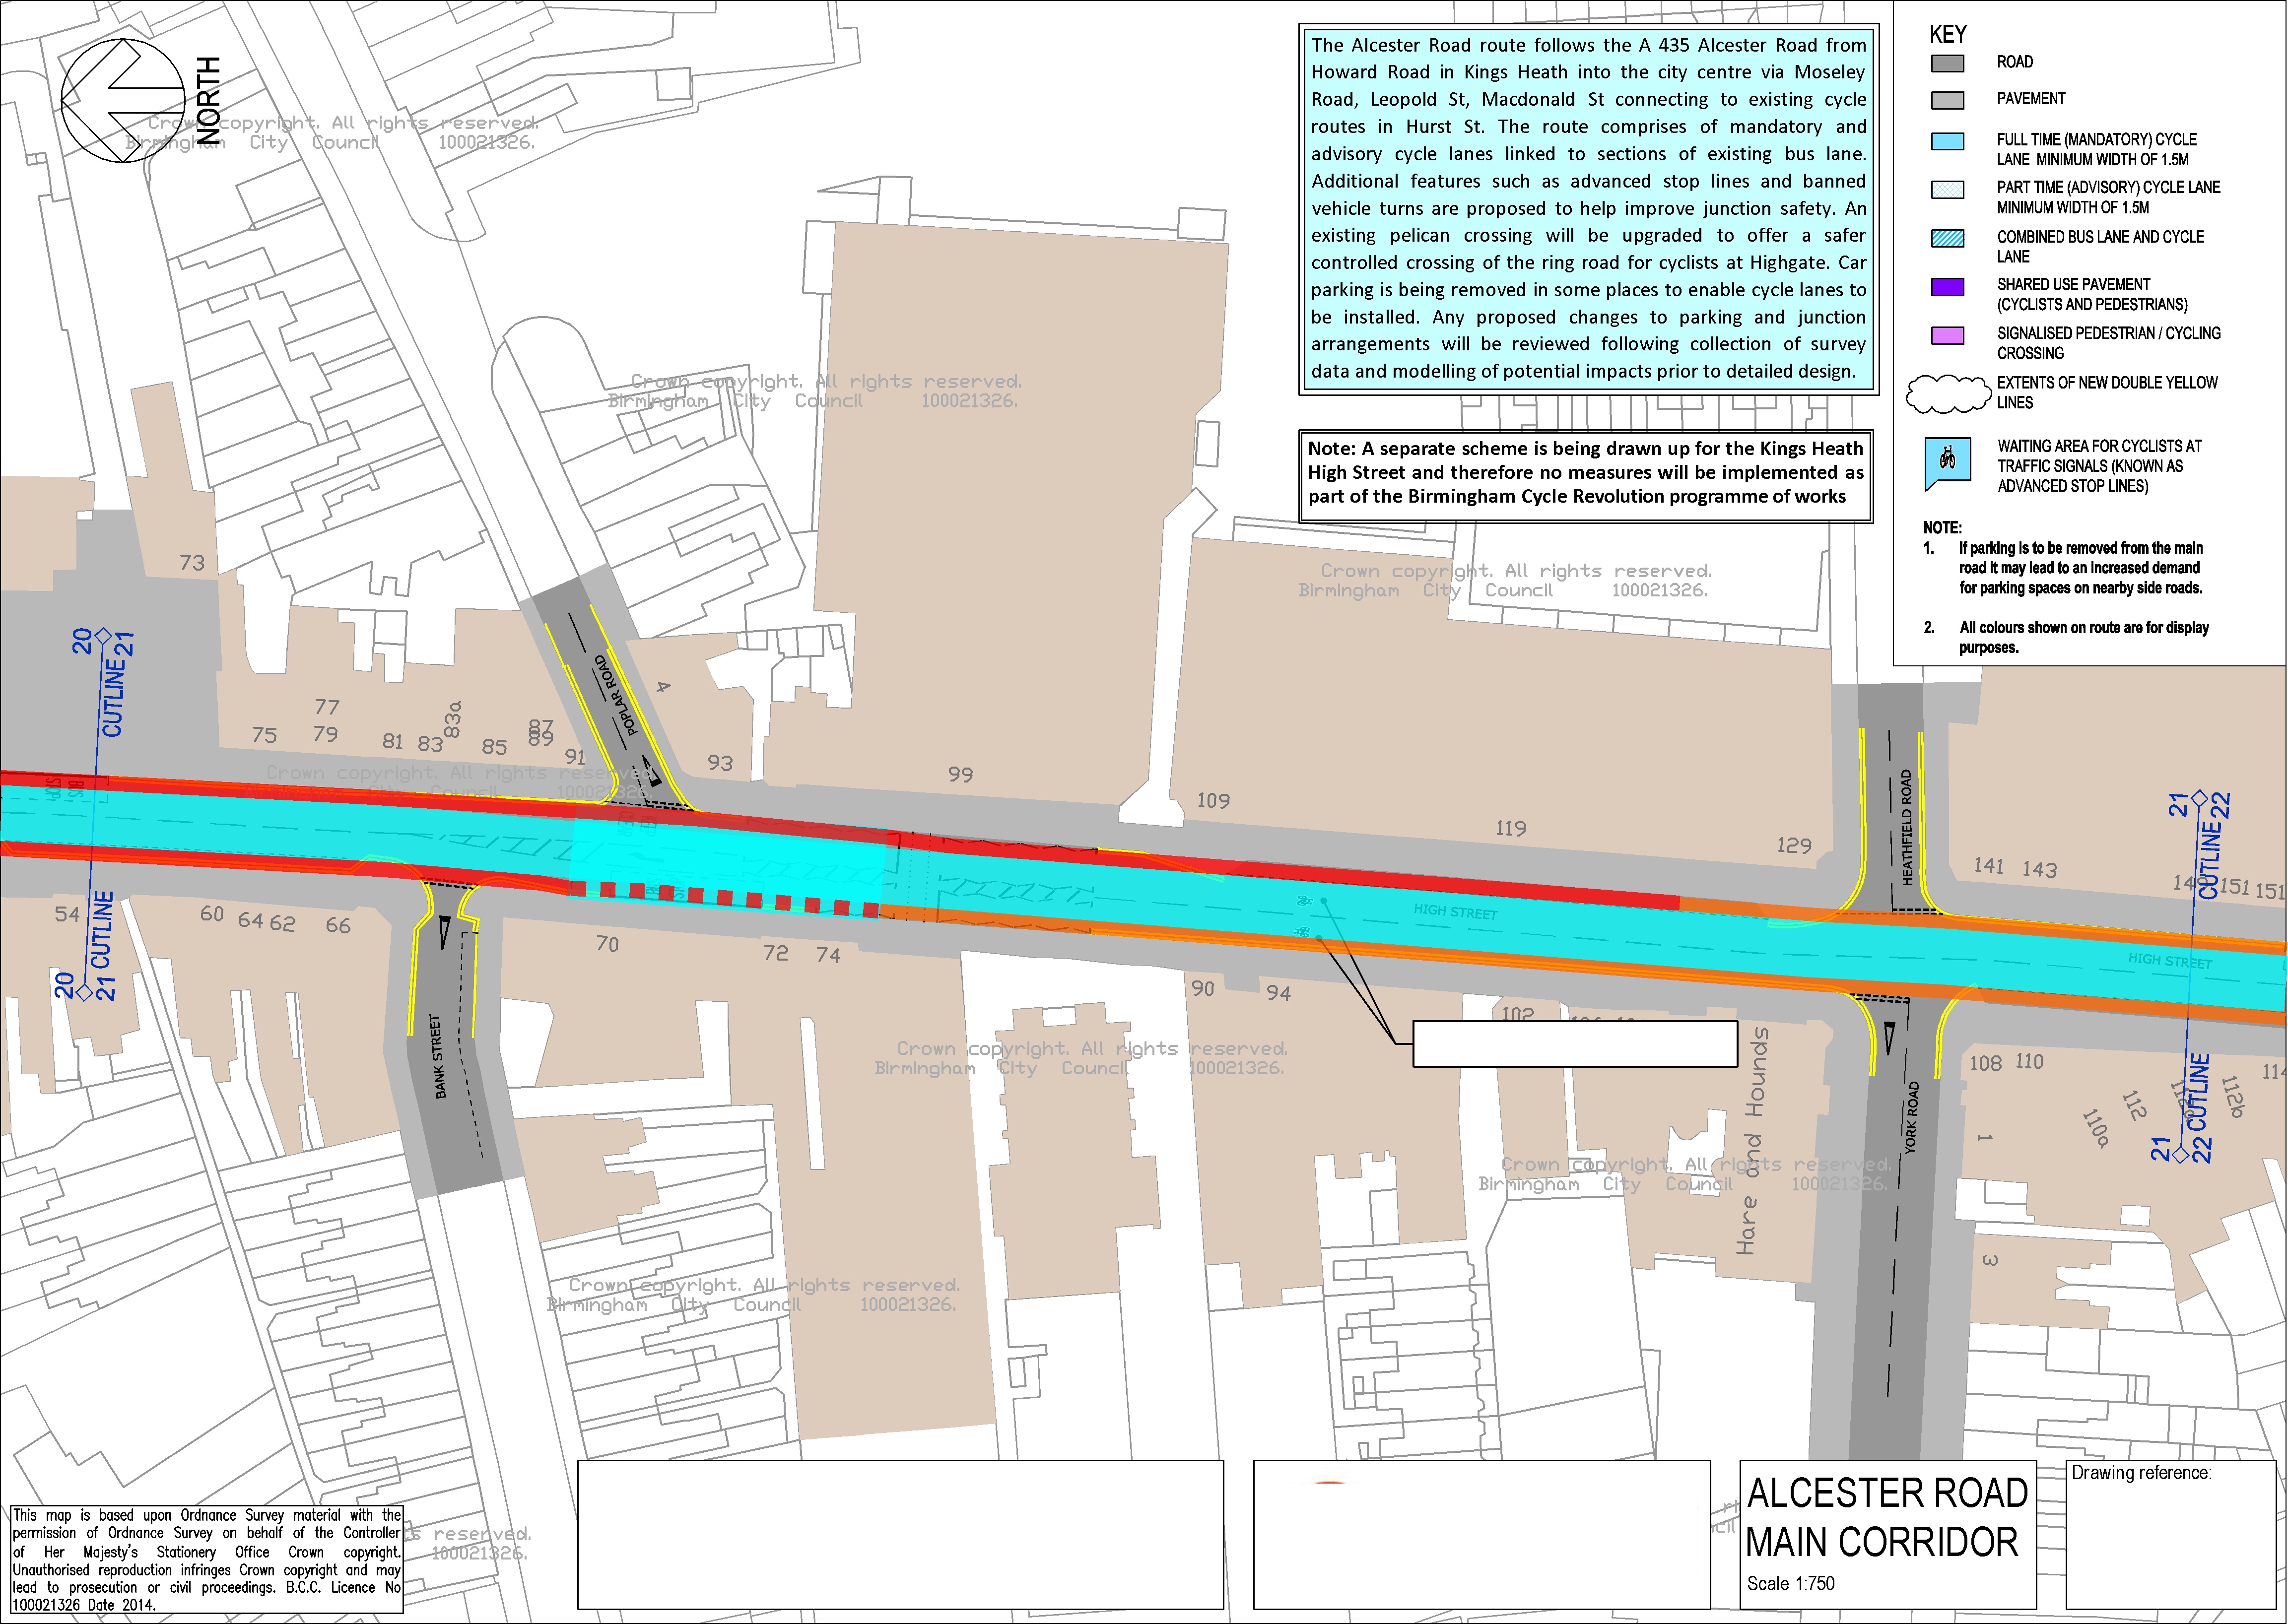 Push Bikes proposal for Kings Heath (section 3)